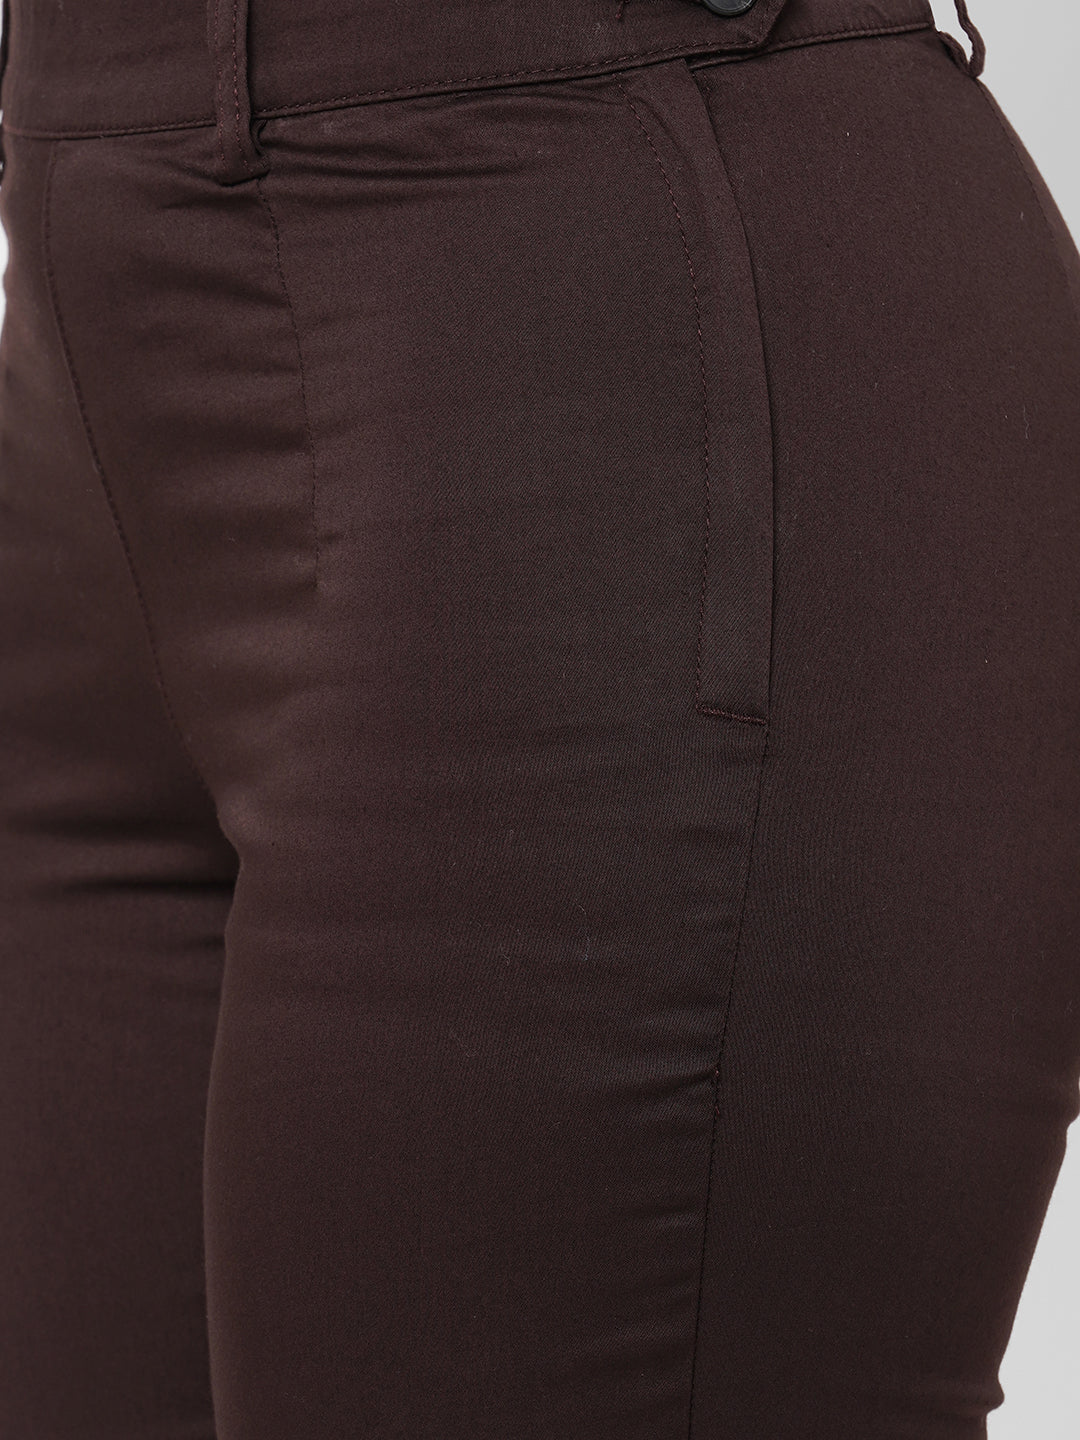 Buy Brown Track Pants for Women by SAM Online | Ajio.com